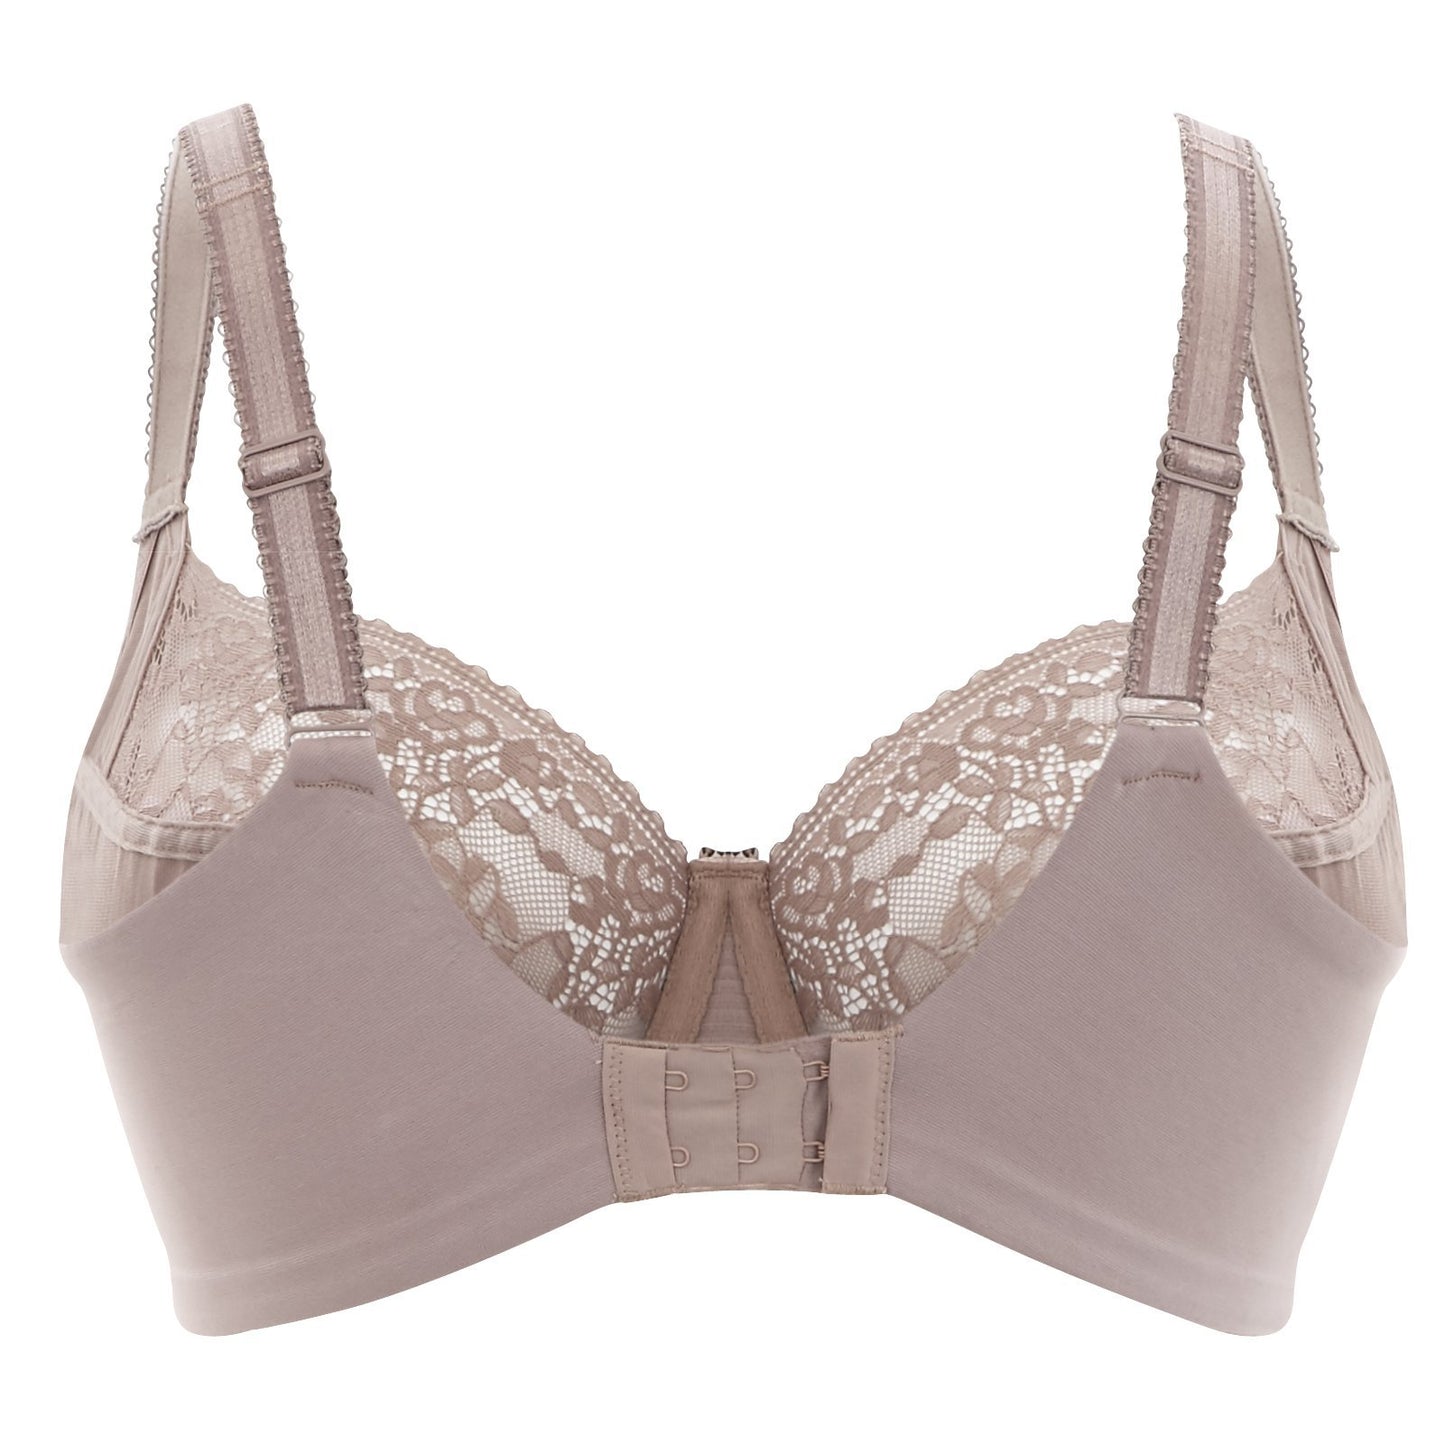 Sculptresse by Panache Chi Chi Full Cup - Pinned Up Bra Lounge